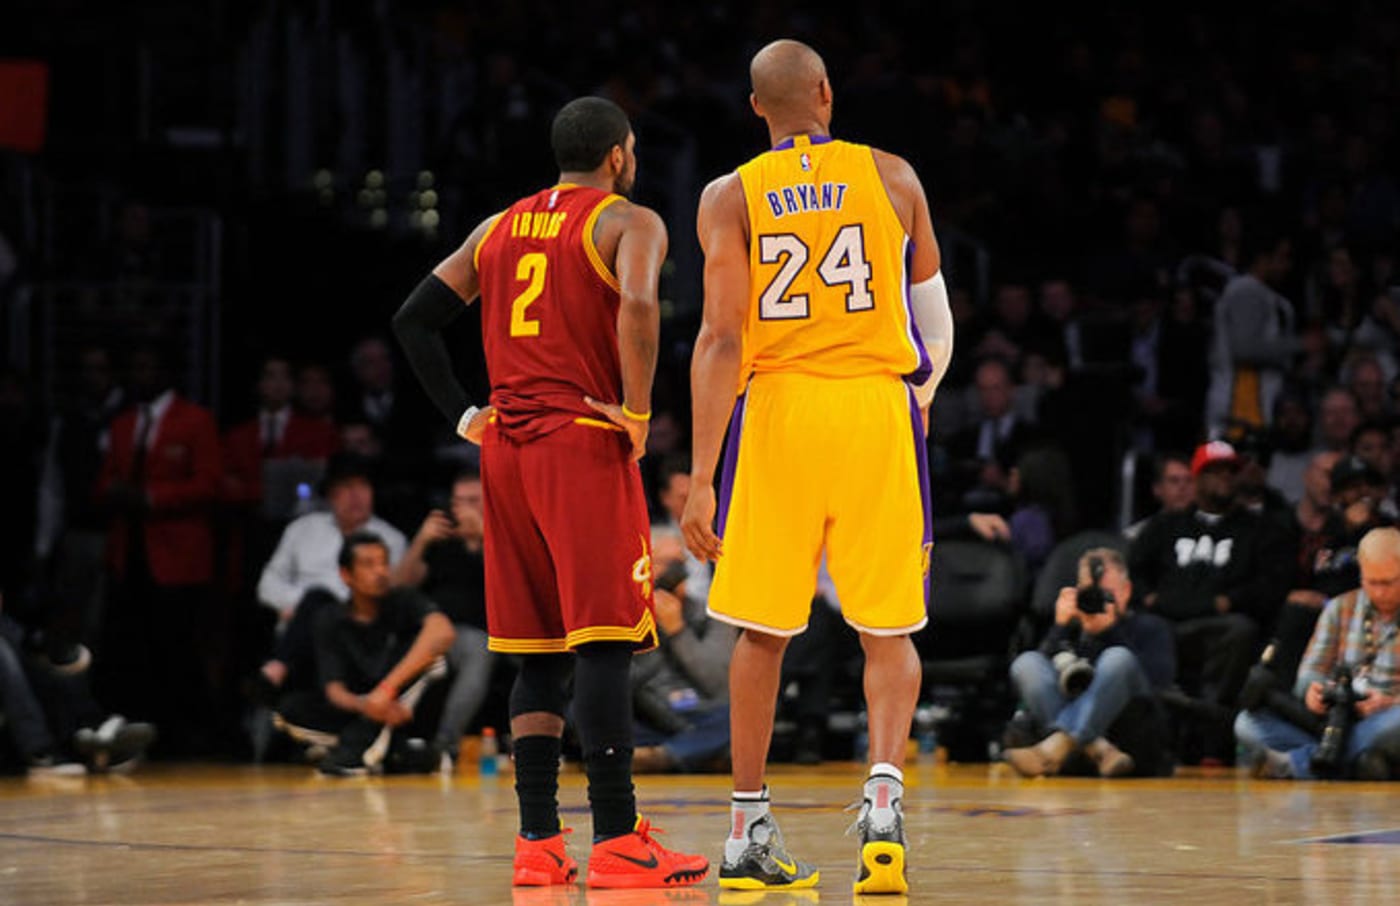 kyrie irving kobe bryant shoes